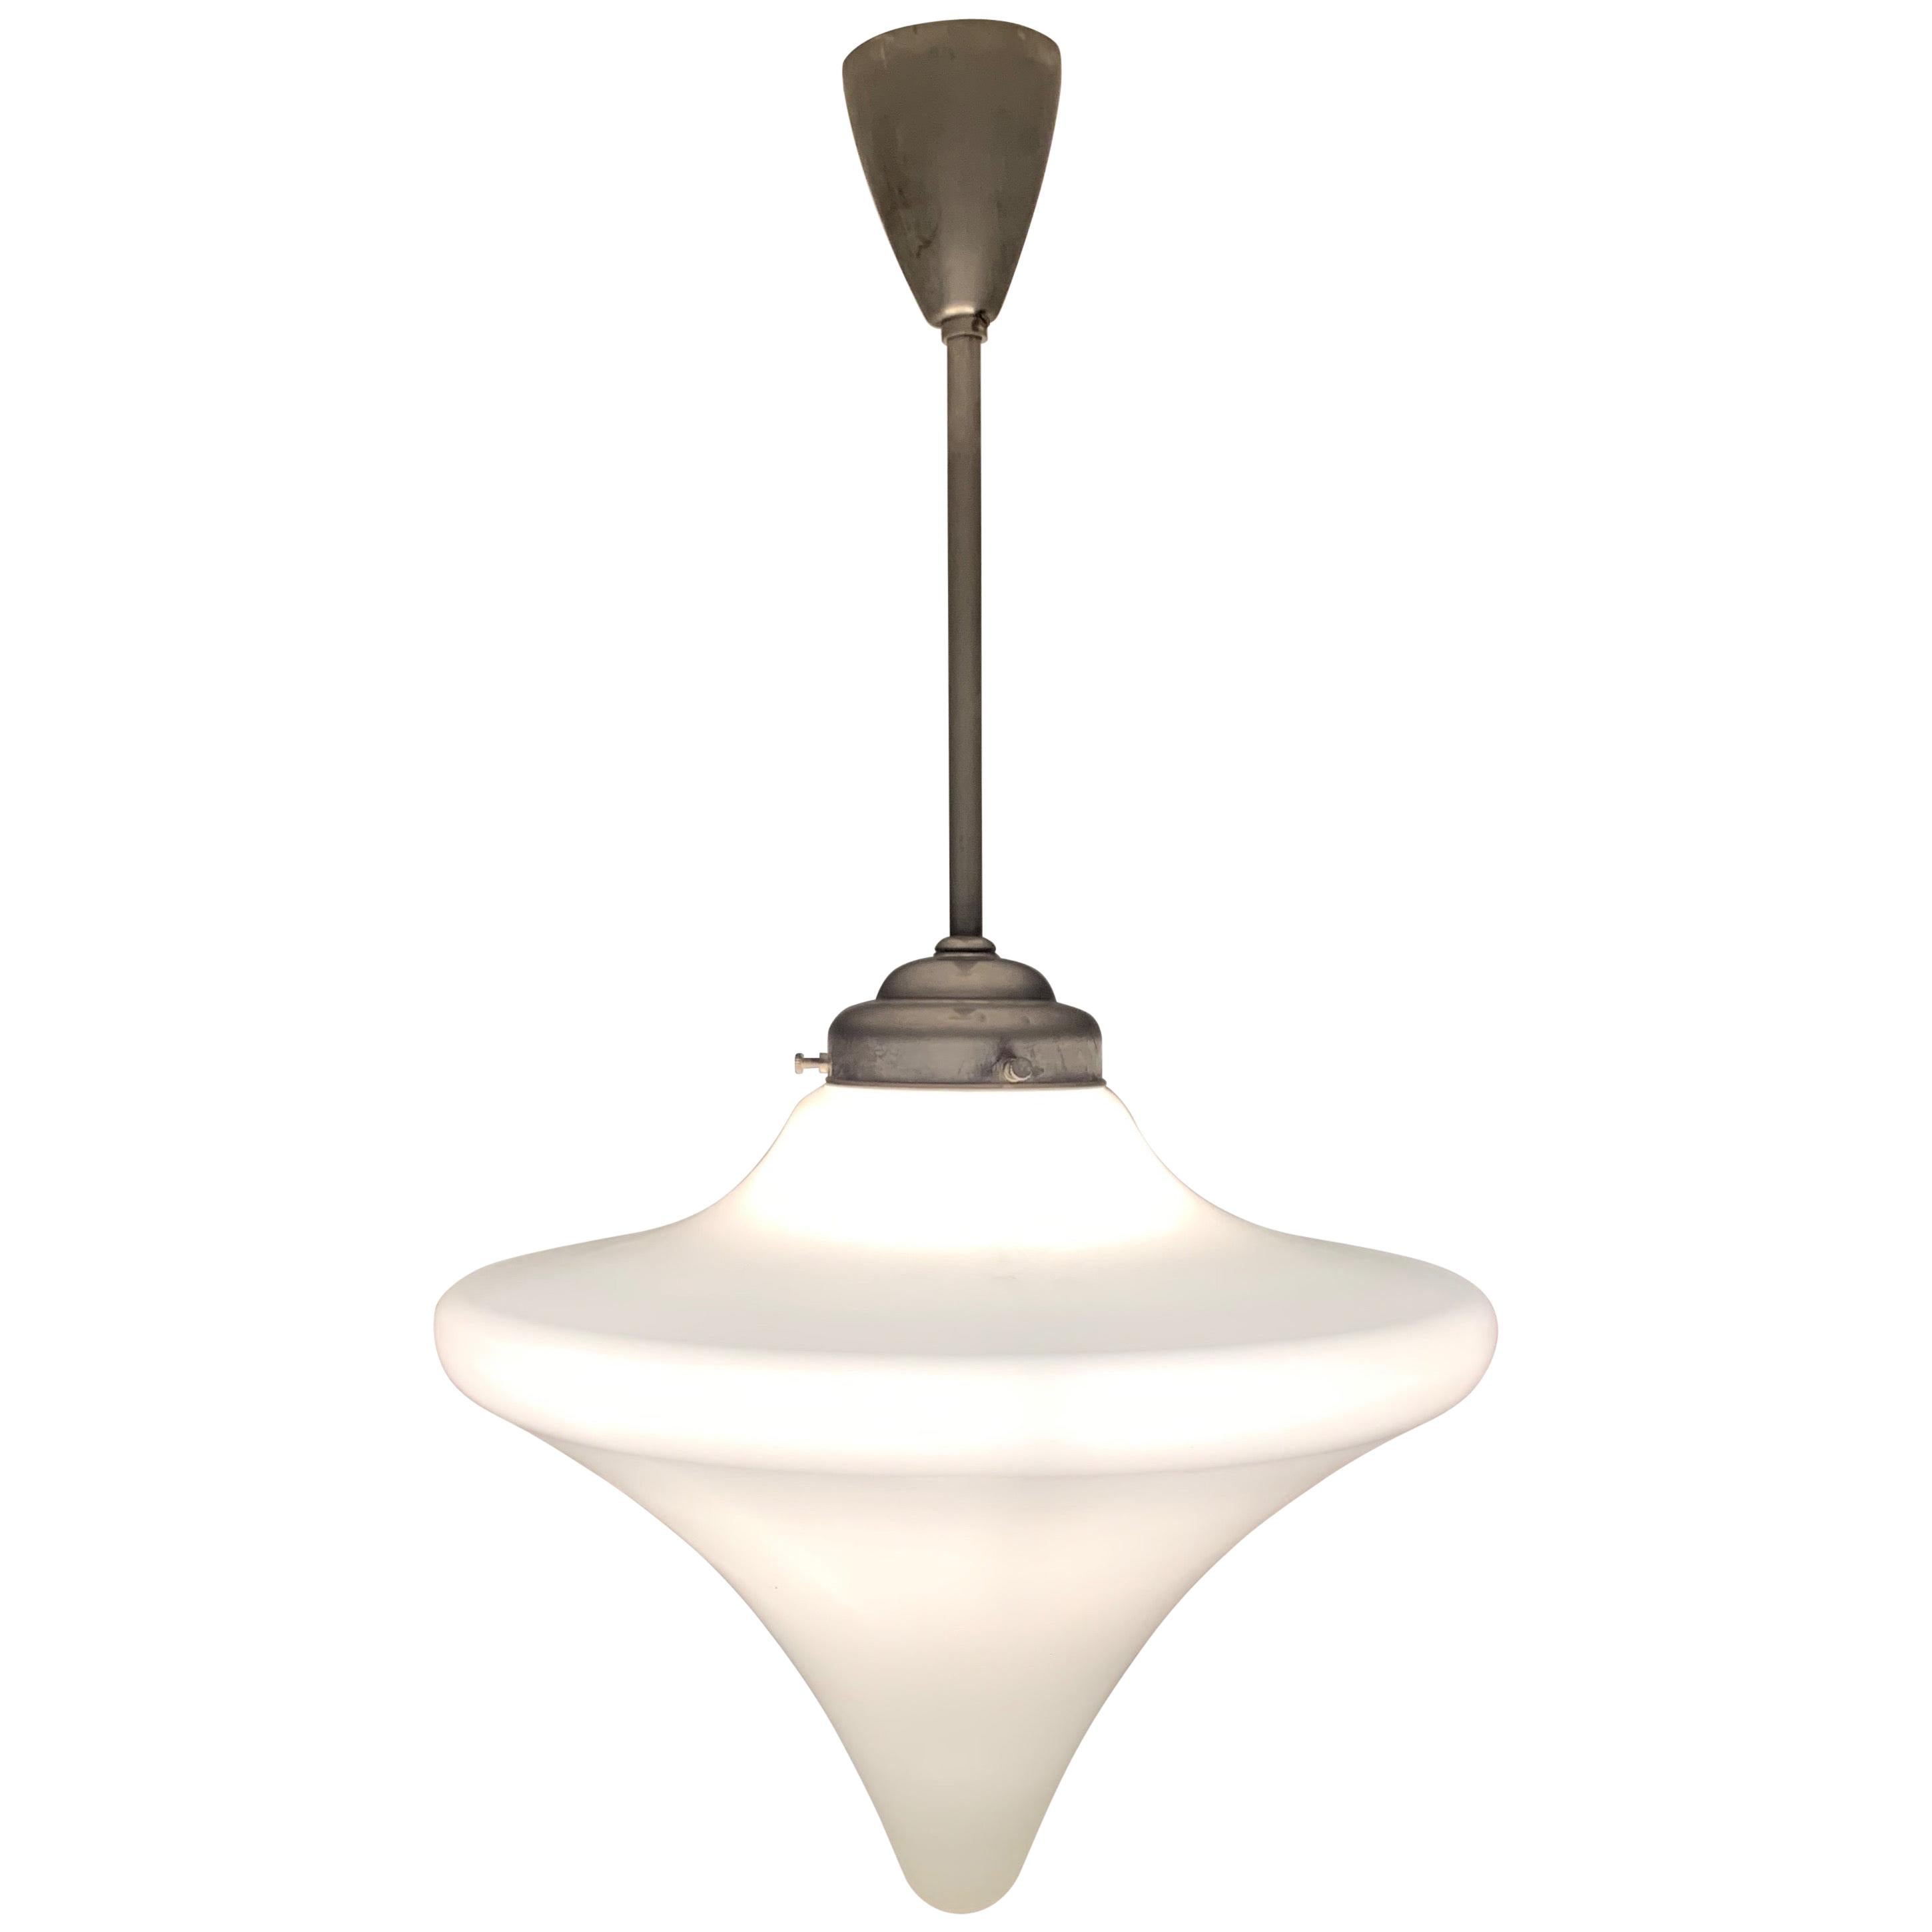 Aesthetically Perfect 1920s Art Deco Opaline Glass Pendant Light with Metal Rod For Sale